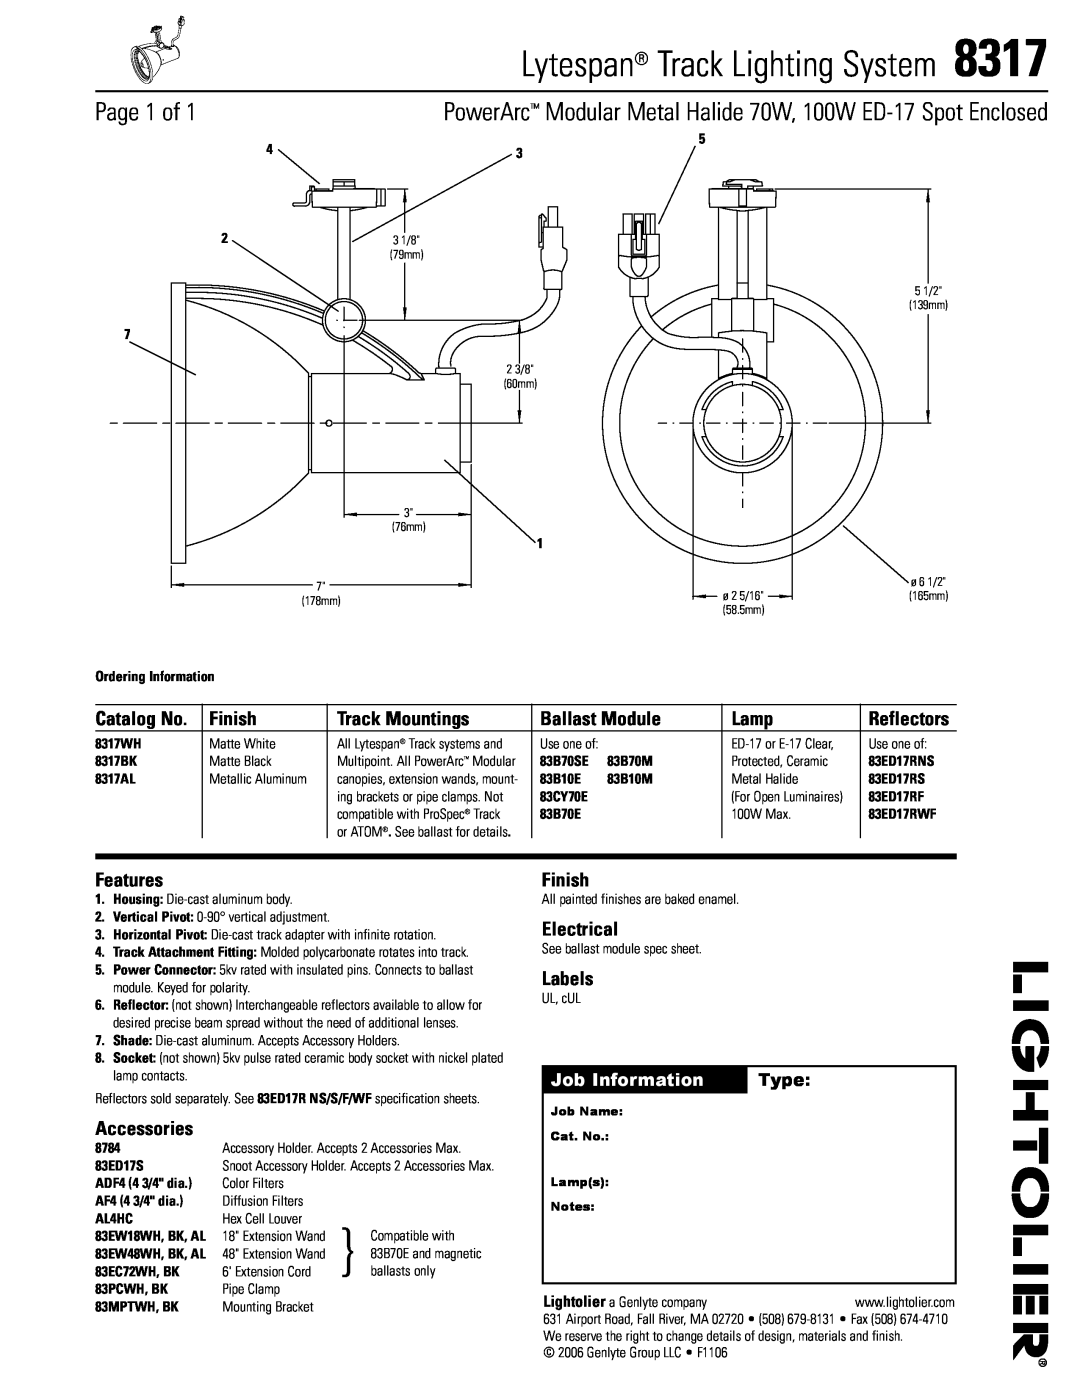 Lightolier 8317 specifications Lytespan Track Lighting System, Page 1 of, Finish, Track Mountings, Ballast Module, Lamp 